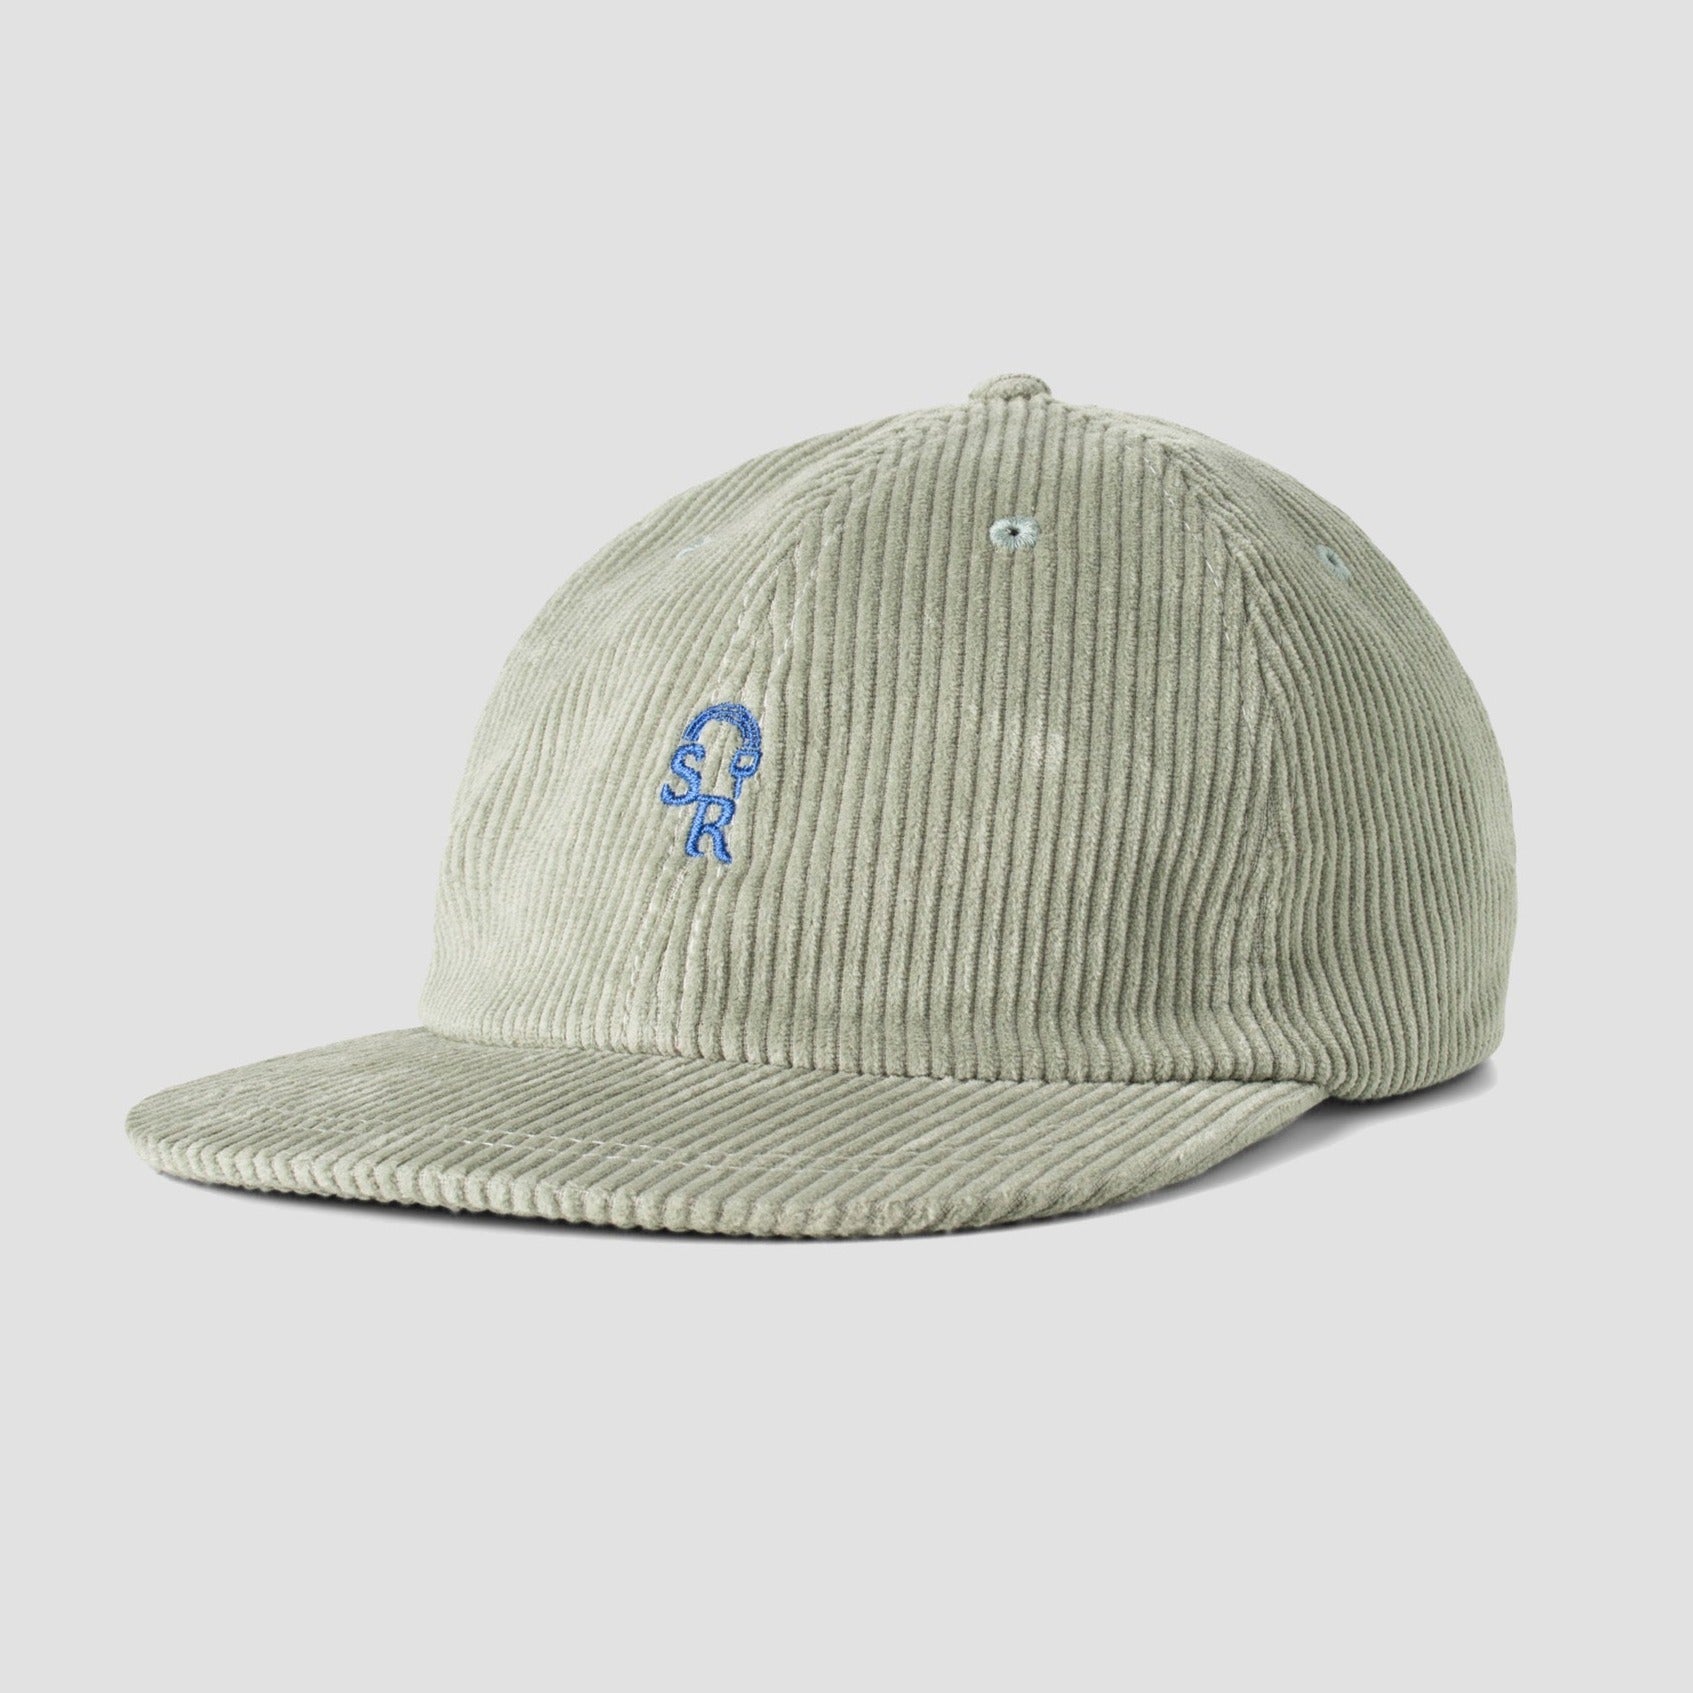 Stan Ray Ray-Bow Cord Cap - Opal